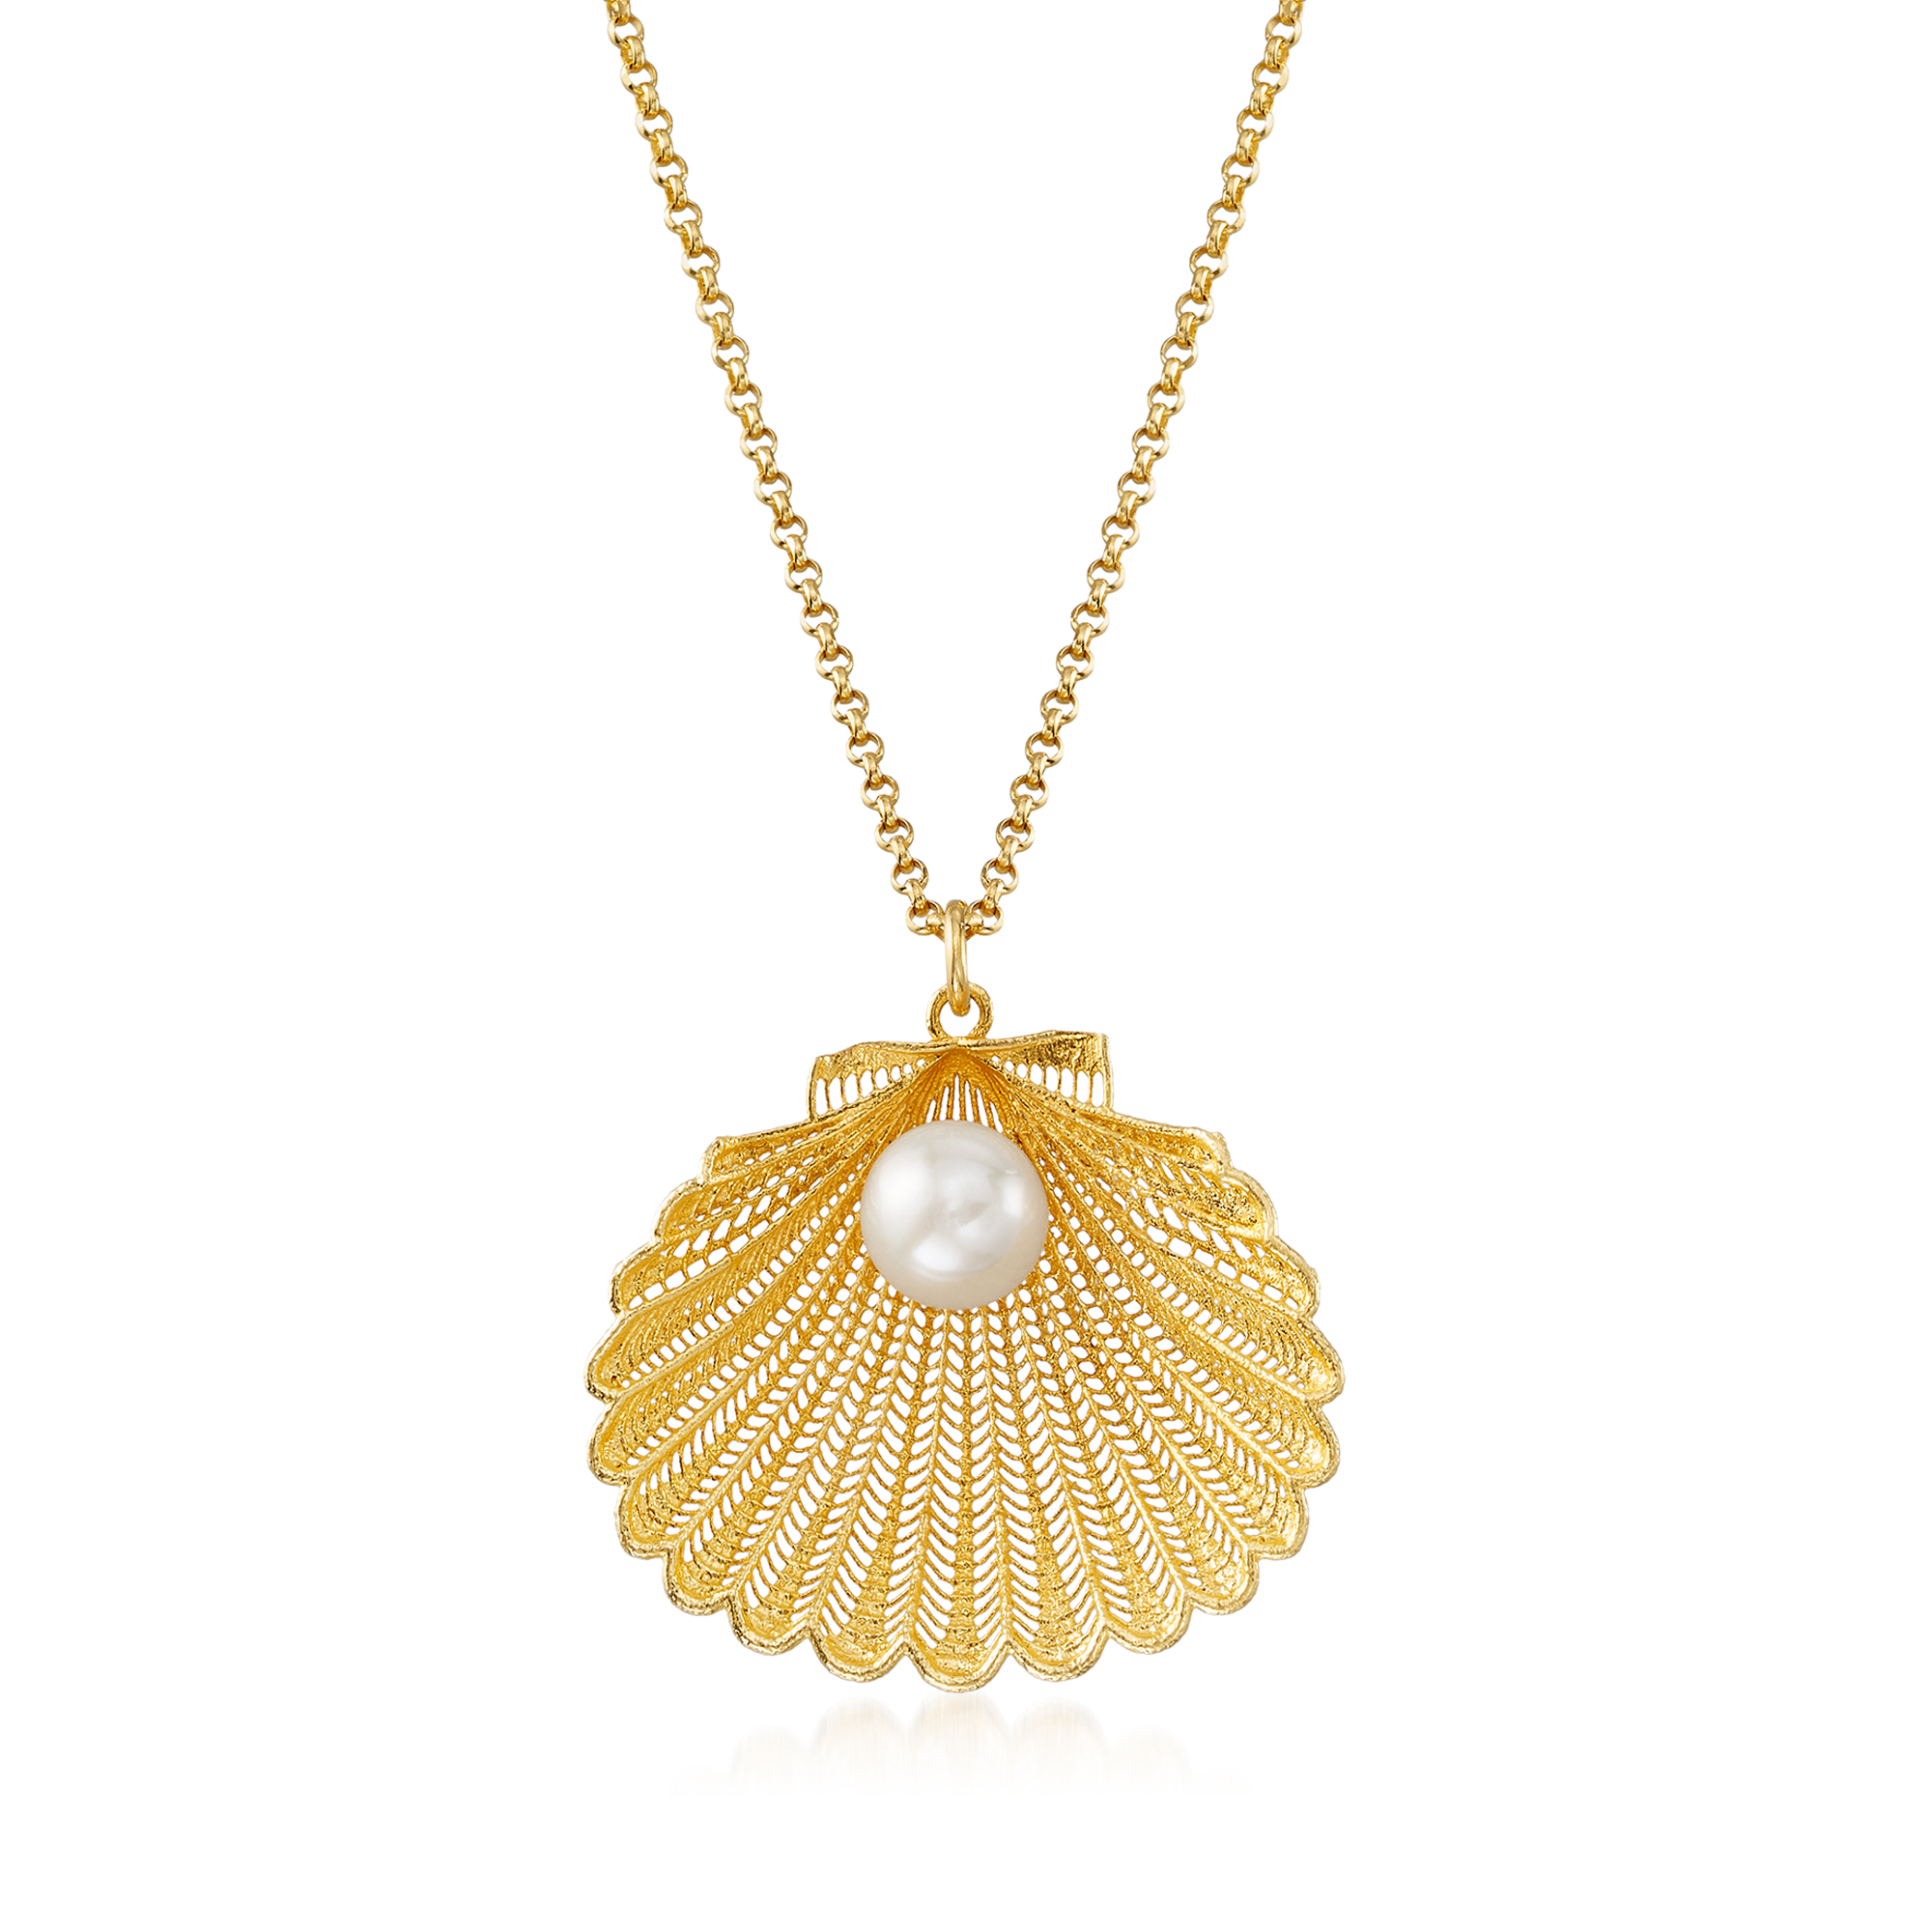 Italian 7mm Cultured Pearl Seashell Pendant Necklace in 18kt Gold 